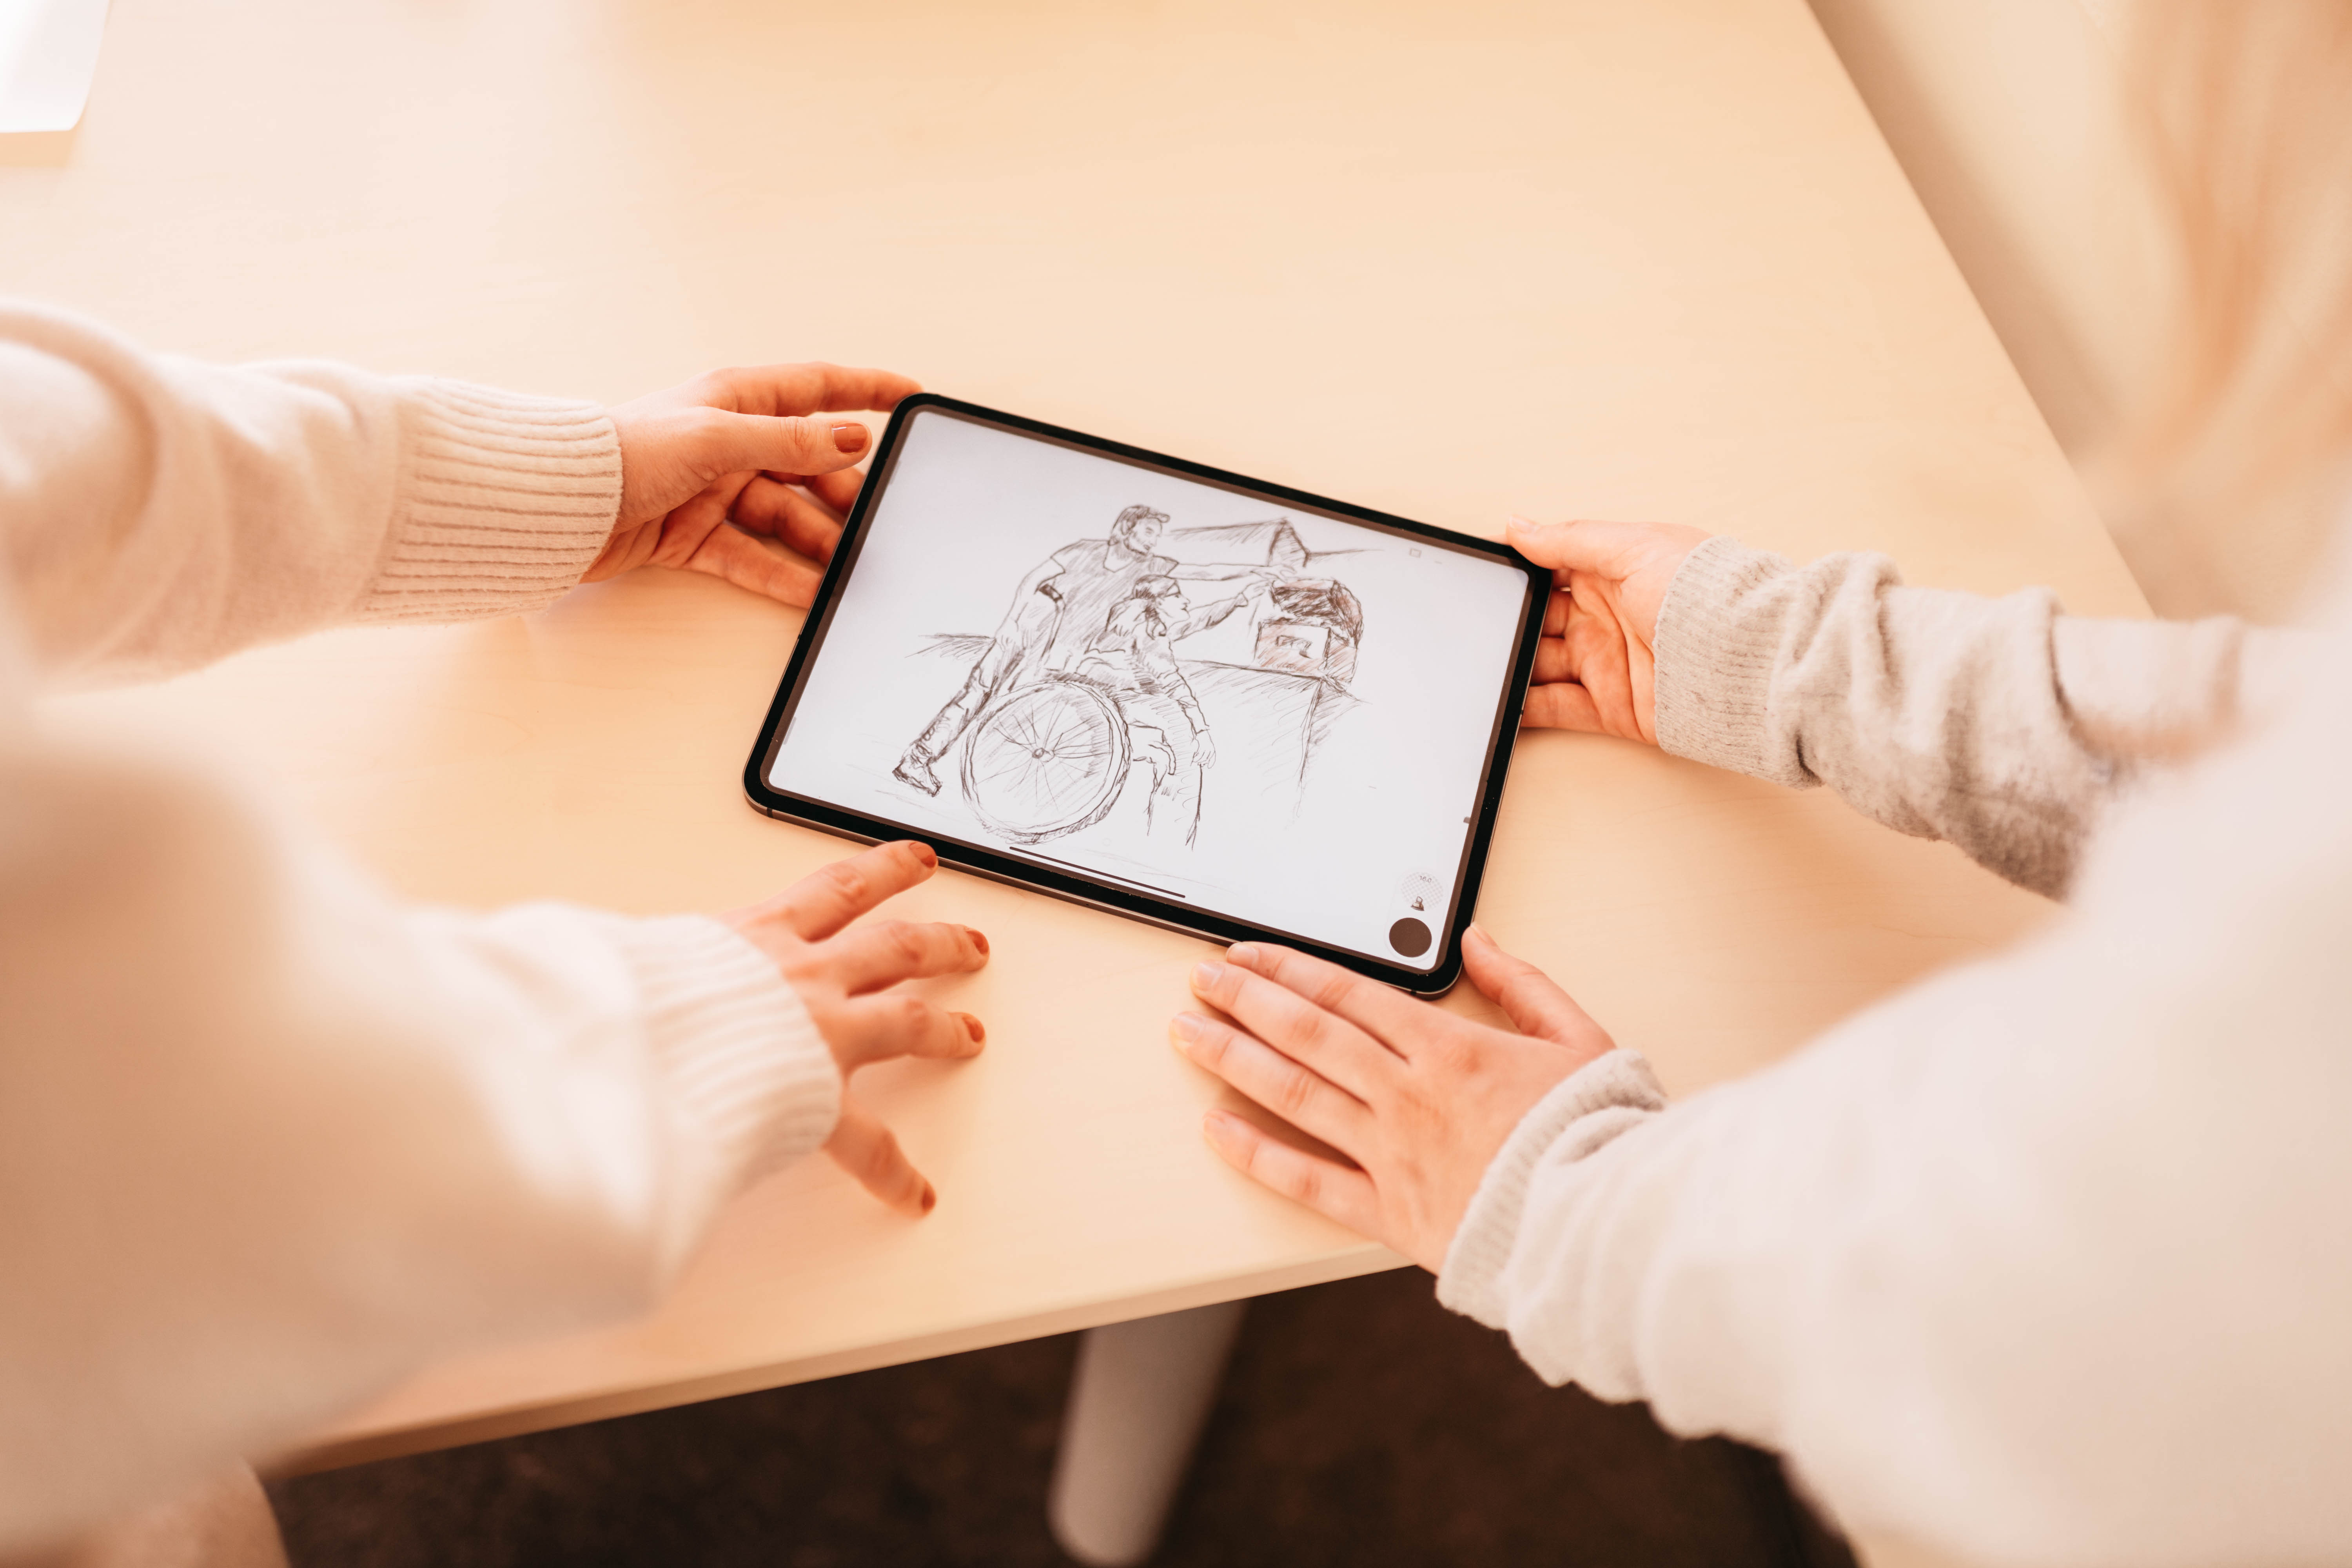 Two staff, people are holding a tablet on which a drawing with a wheelchair user can be seen